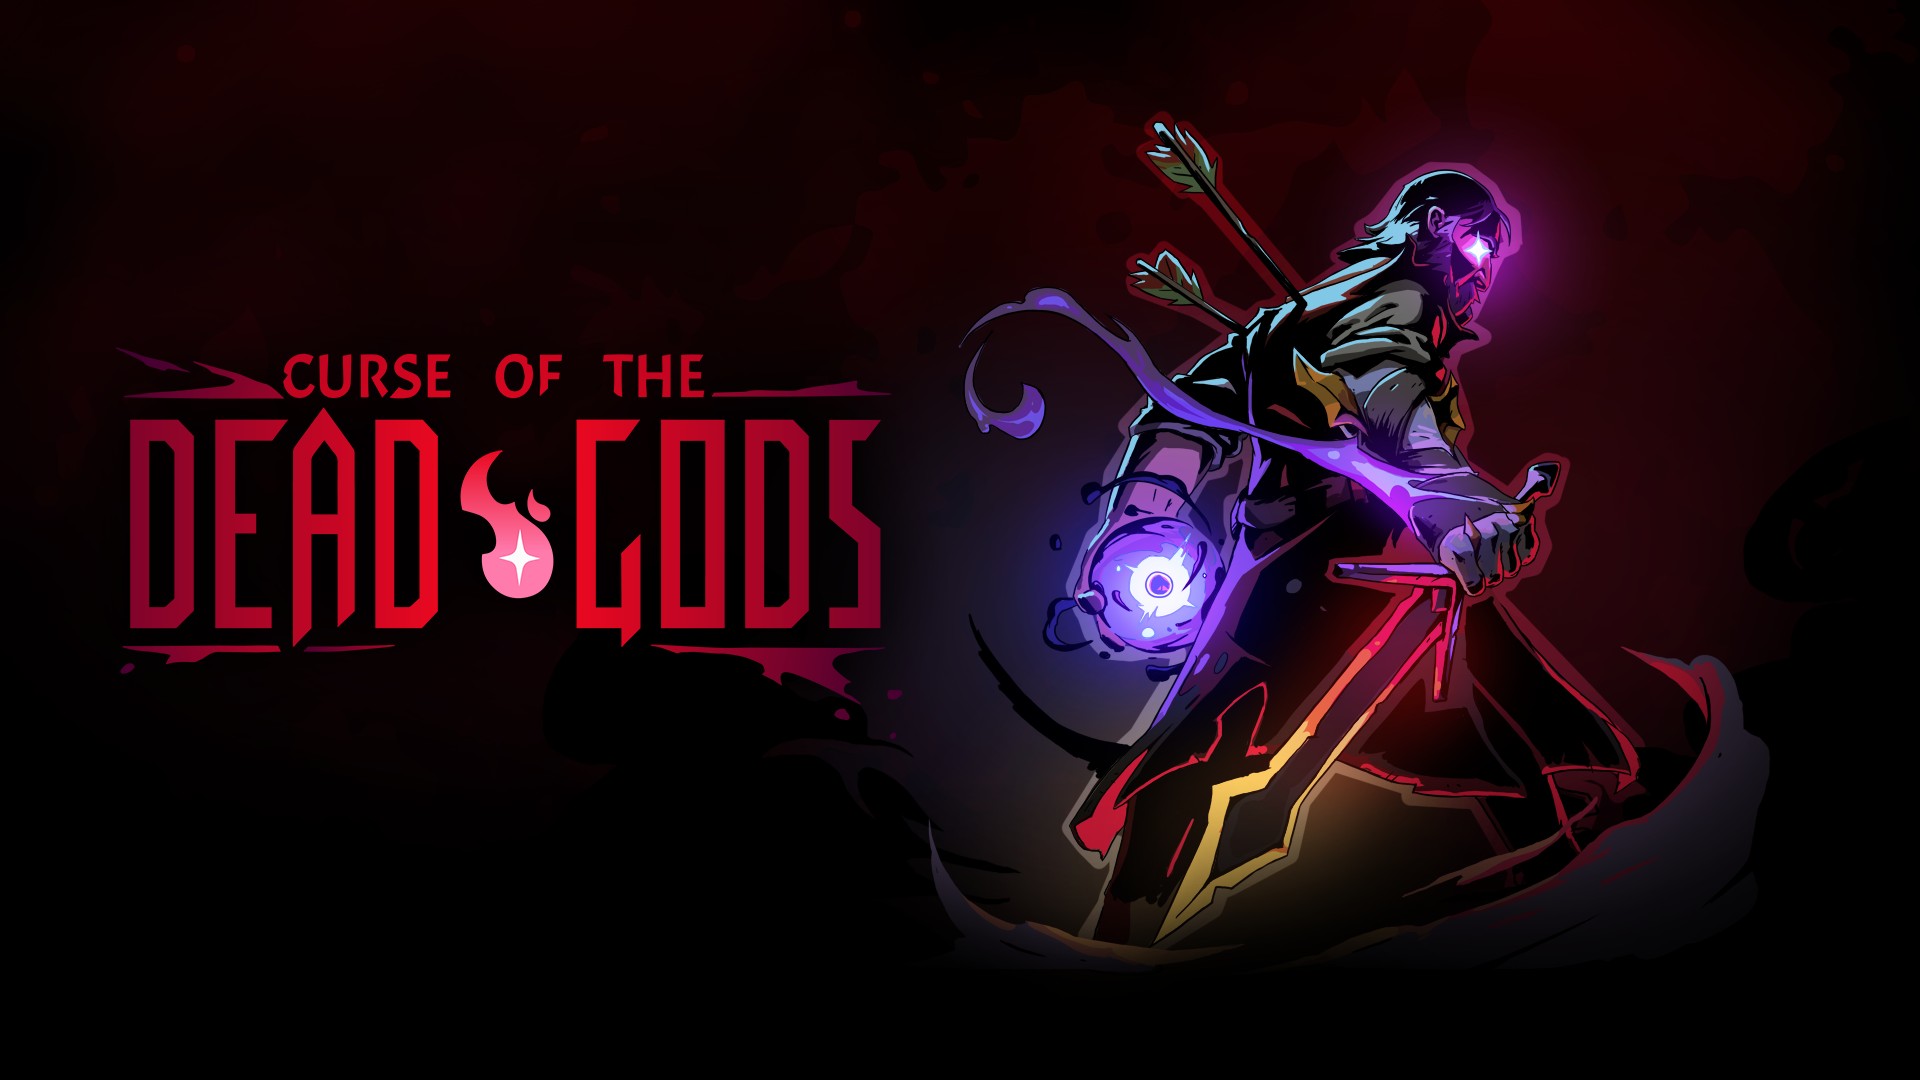 Video For Curse of the Dead Gods Free Update Curse of the Dead Cells is Available Now